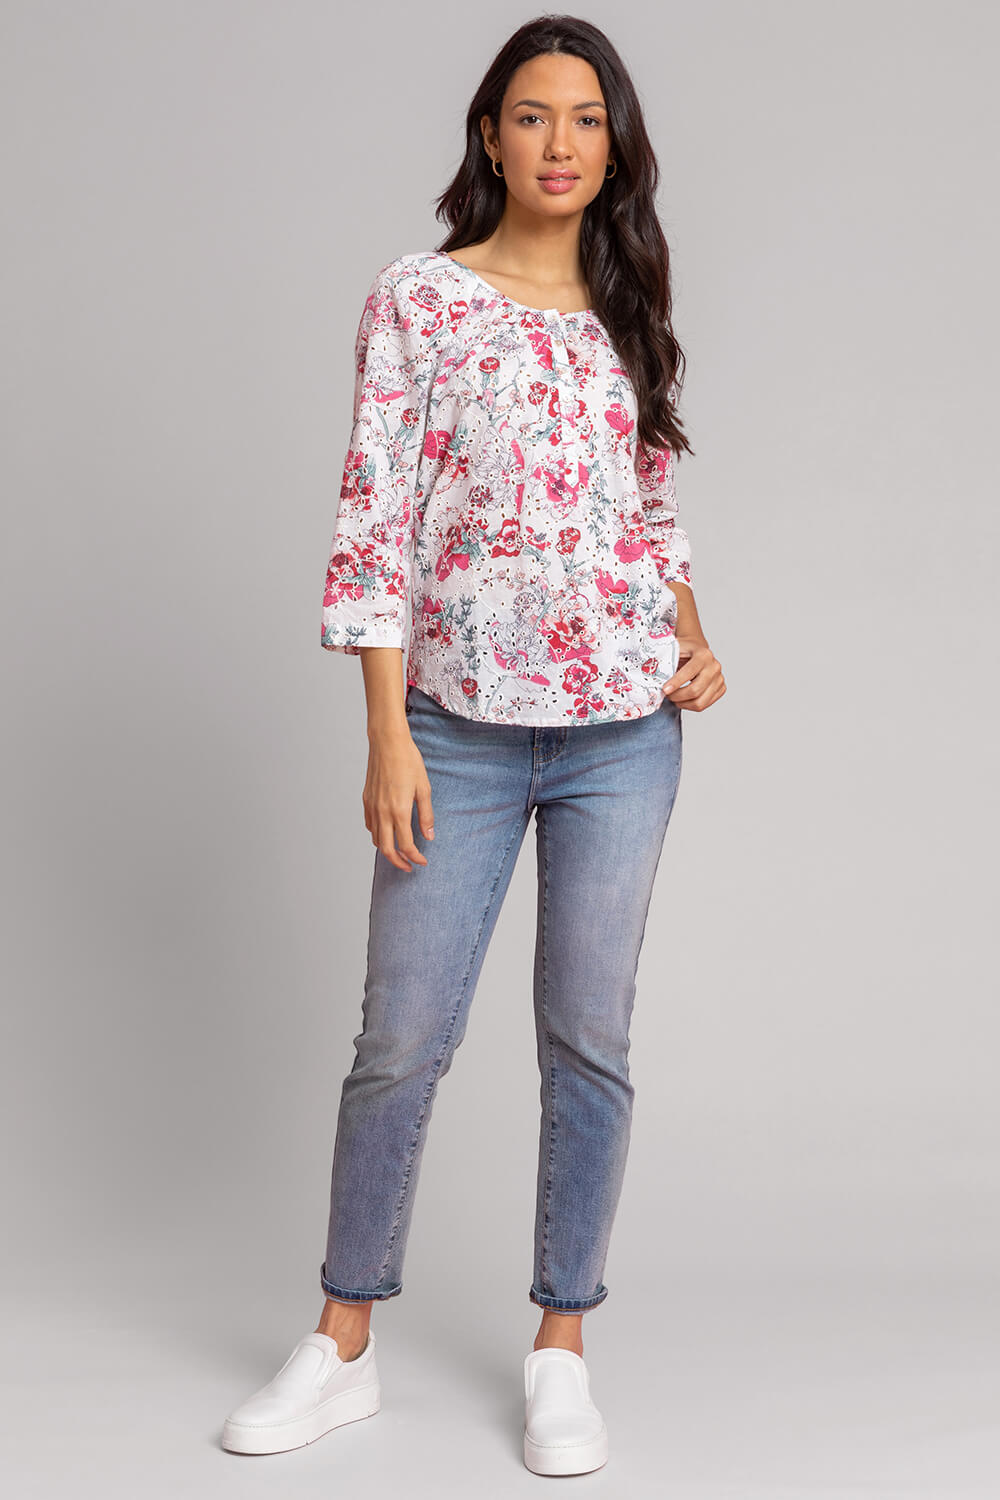 PINK Broderie Floral Print Button Top, Image 3 of 4